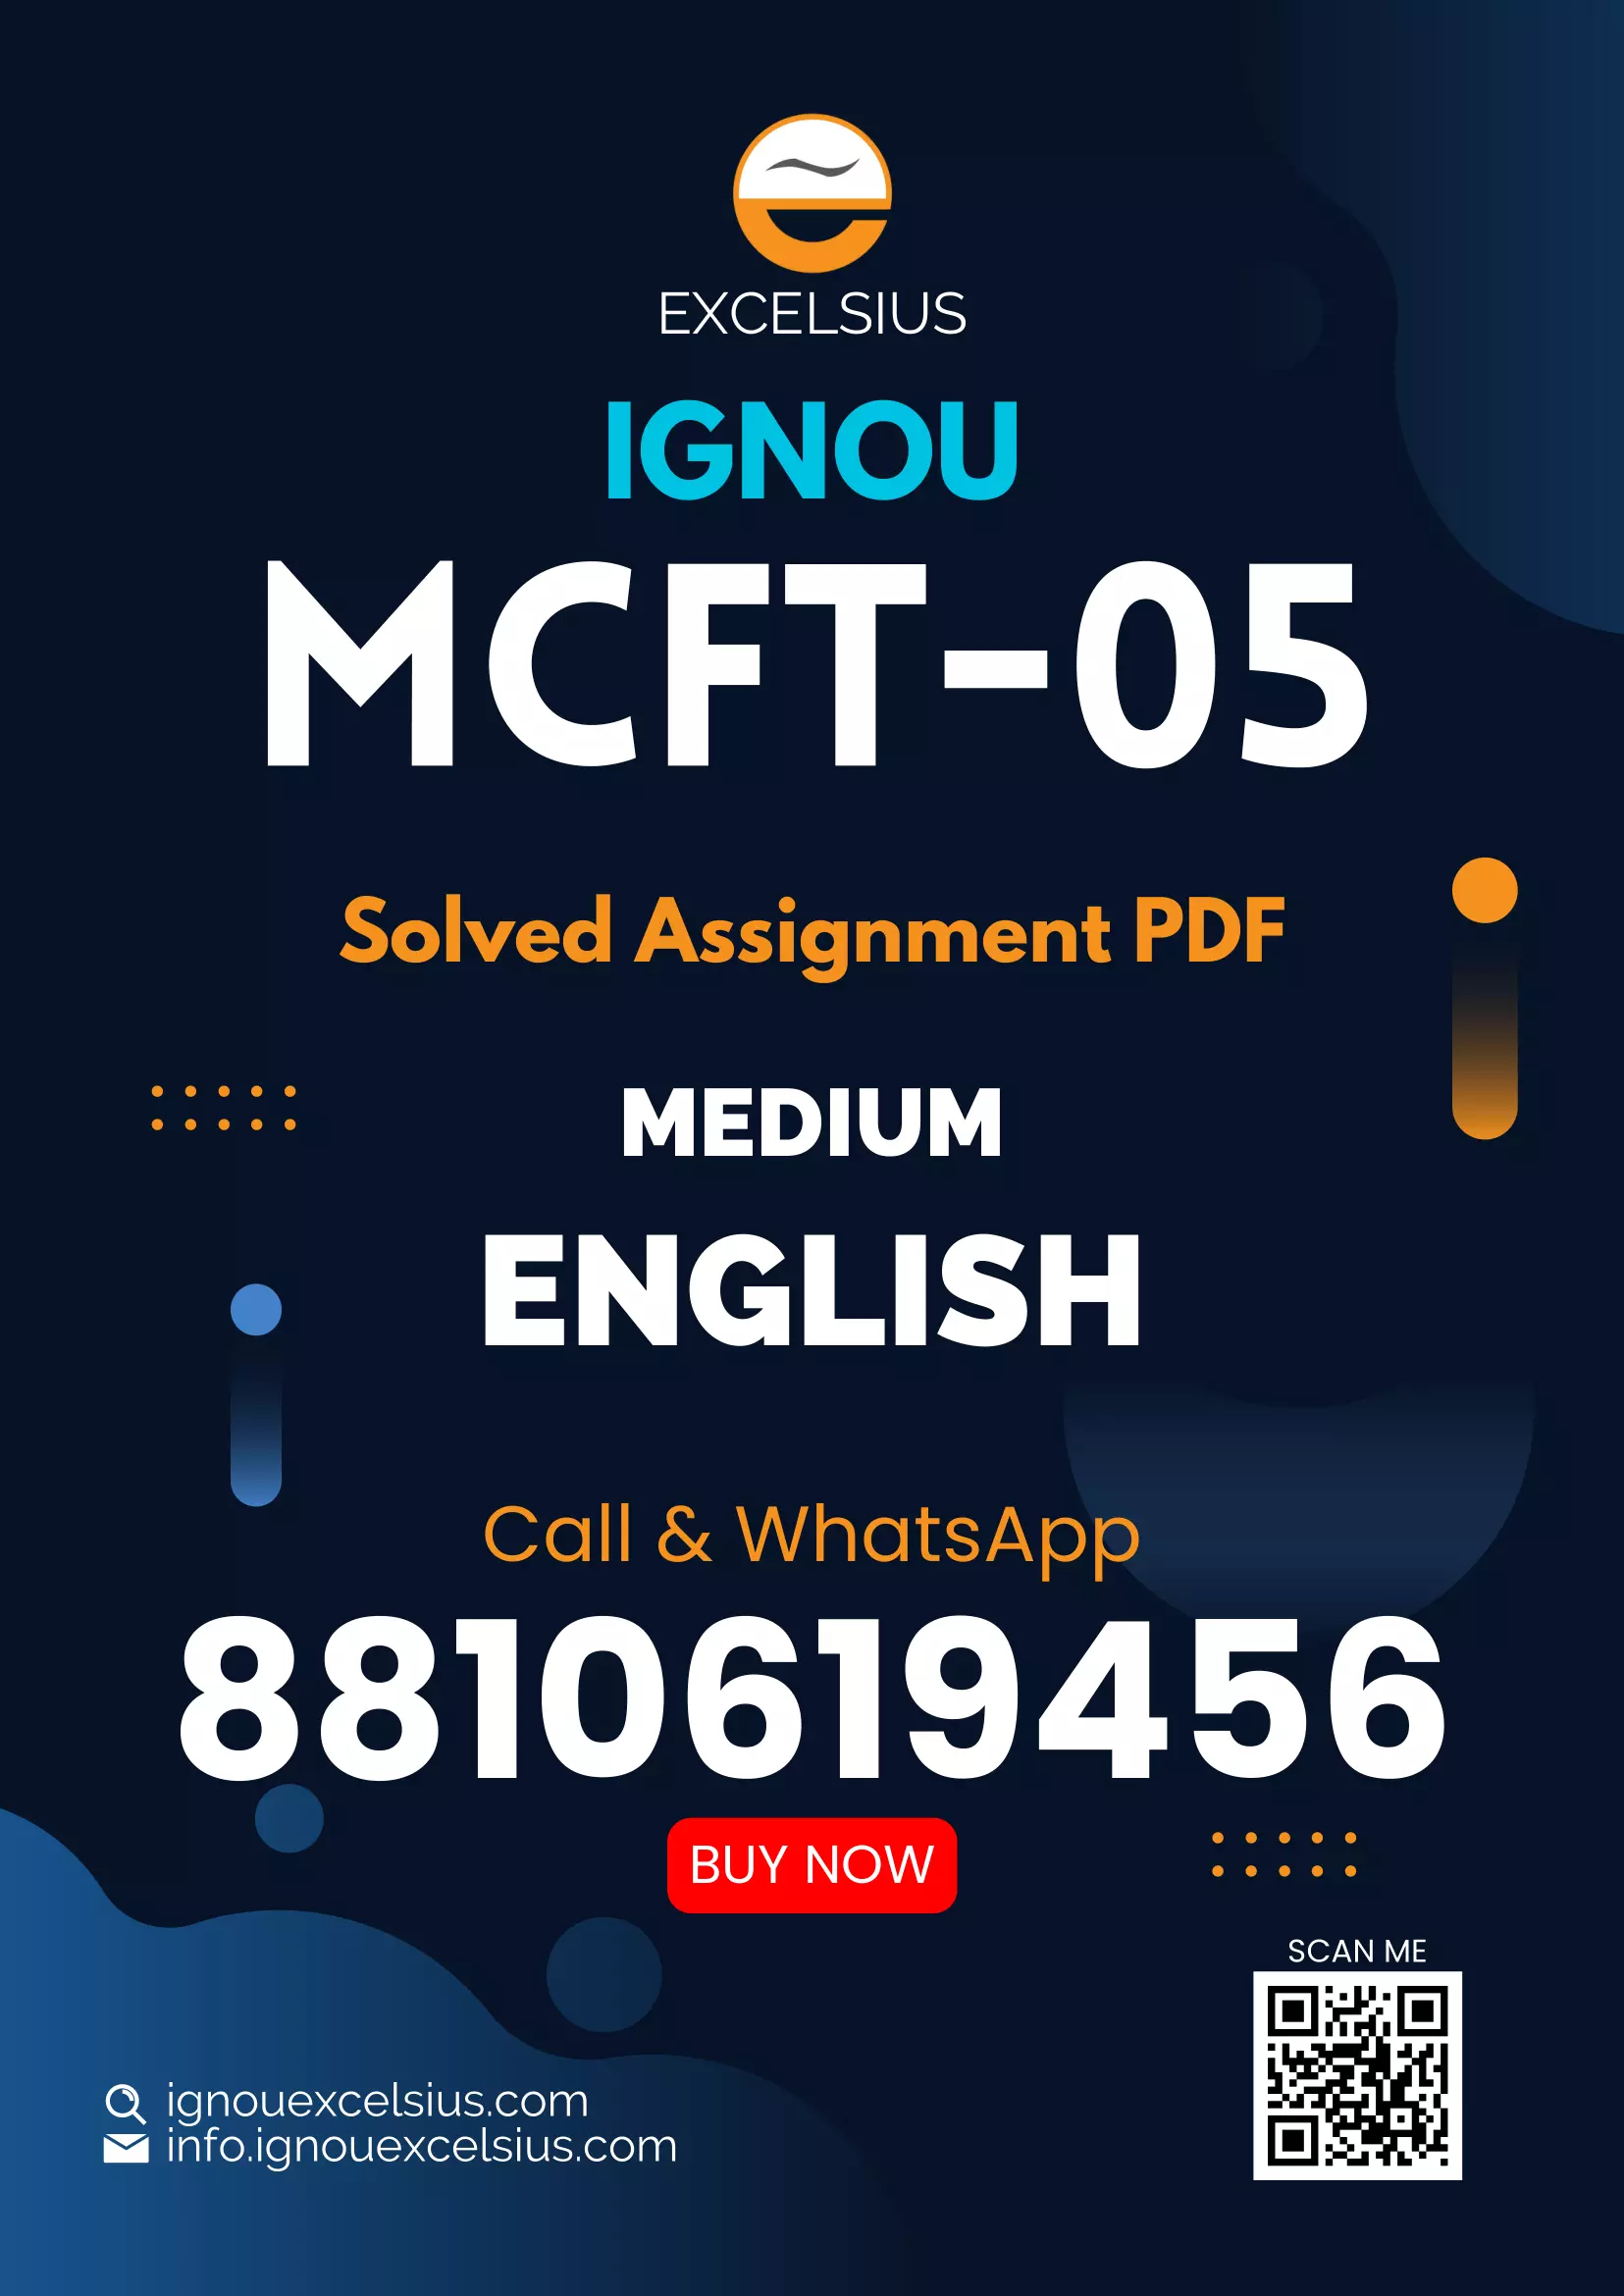 IGNOU MCFT-05 - Counselling and Family Therapy: Research Methods and Statistics, Latest Solved Assignment-July 2022 – January 2023